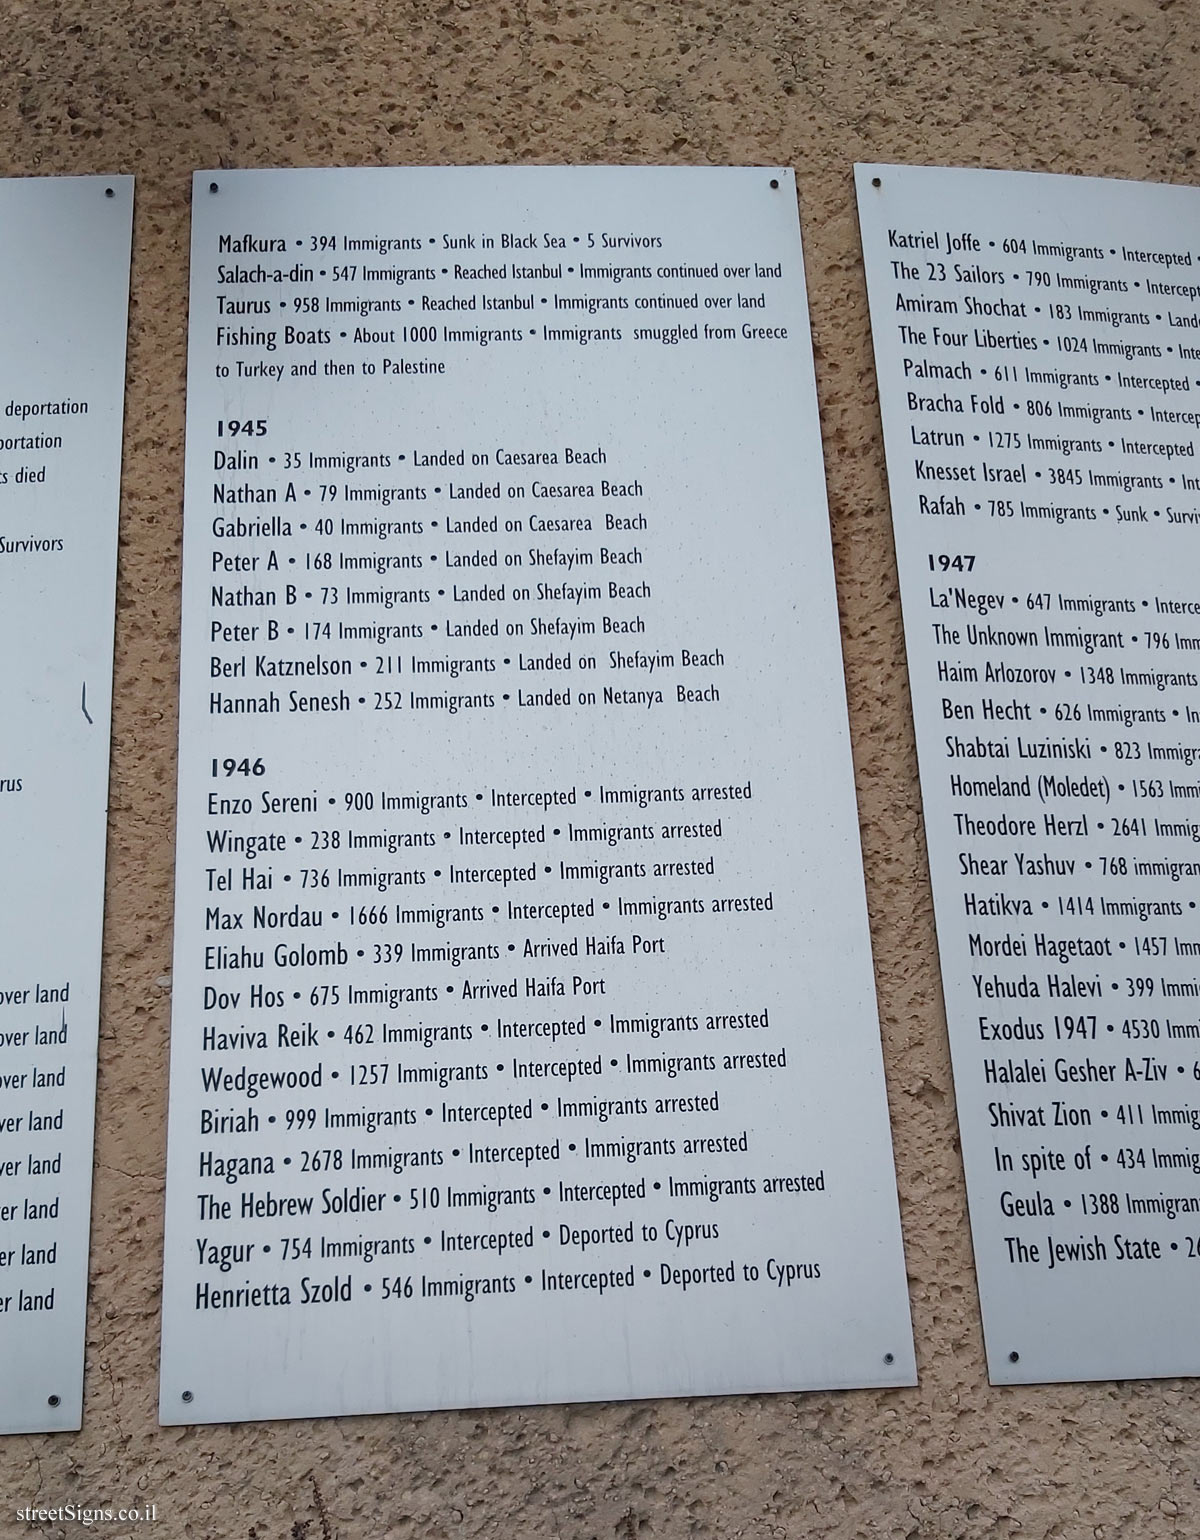 Tel Aviv - London Garden - The Story of the Immigration - Names of Illegal Immigrant Ships (English) - Panel 4